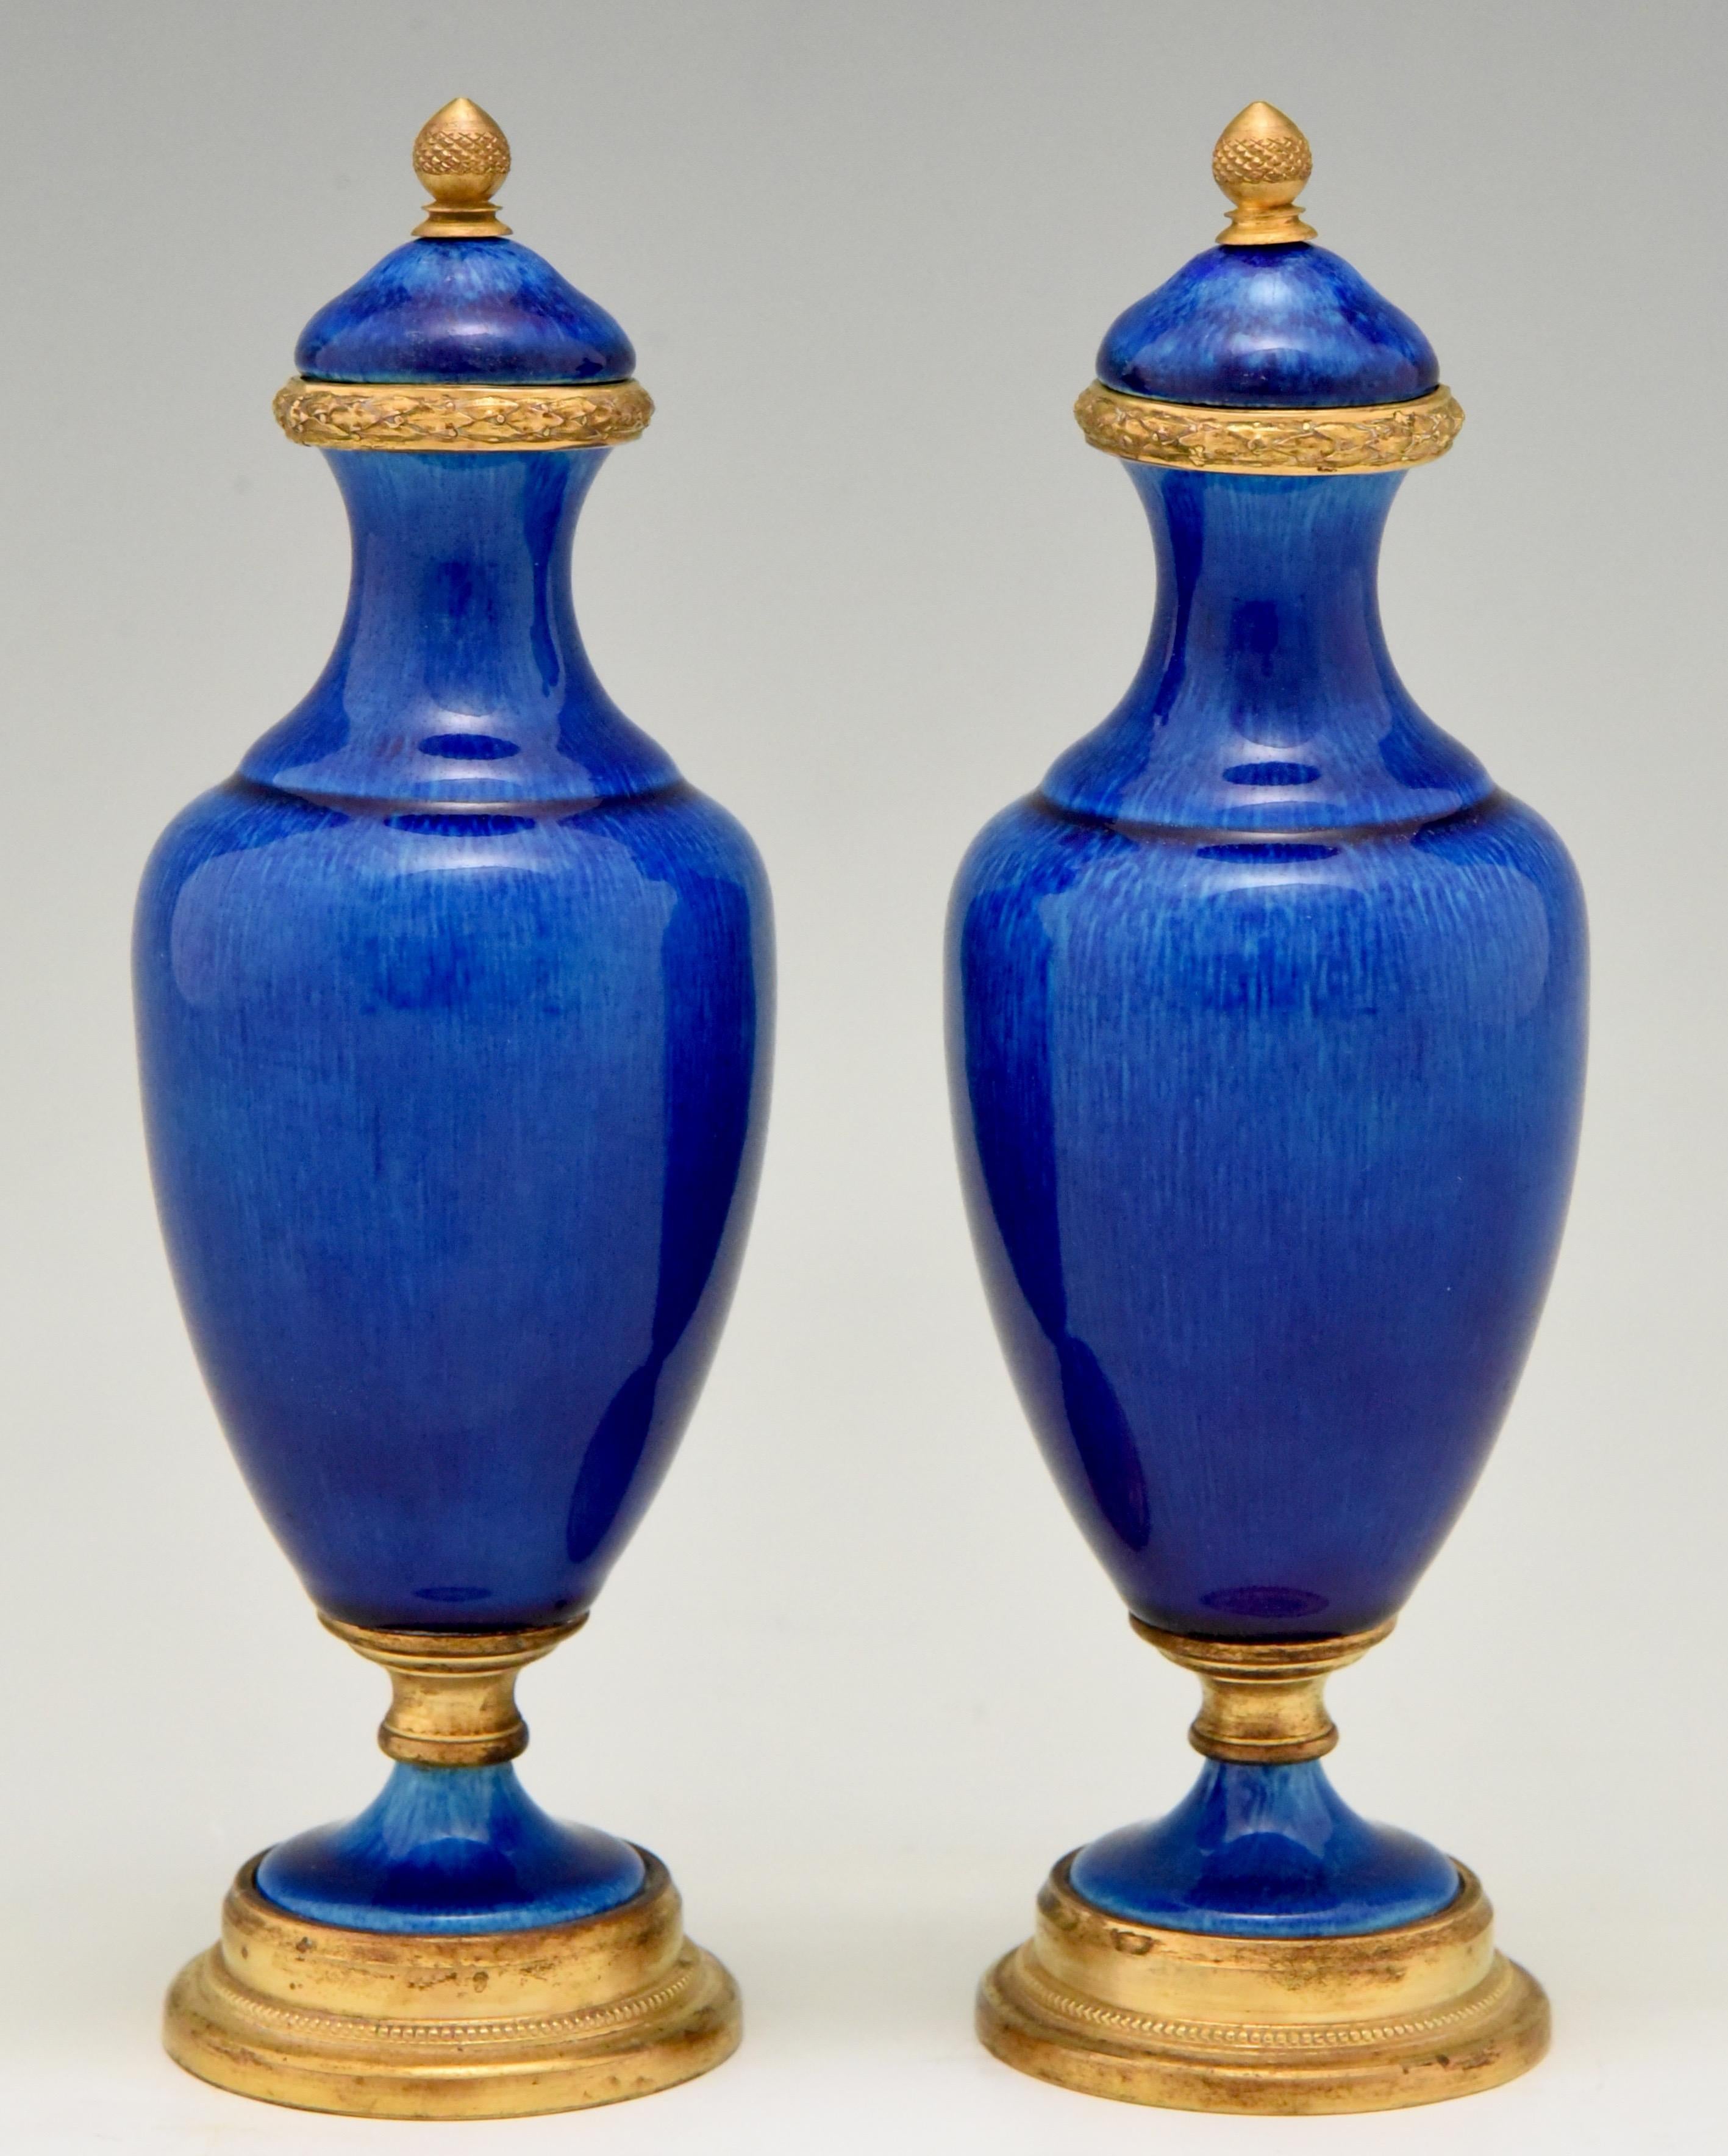 Pair of classical vases or urns with beautiful blue glaze.
The vases are have bronze details and are marked P.M. Sevres.
France, circa 1900. Hard to find in this size.
Measures: H 20 cm x L 7 cm. x W 7 cm.
H 7.9 inch x L 2.8 inch. x W 2.8